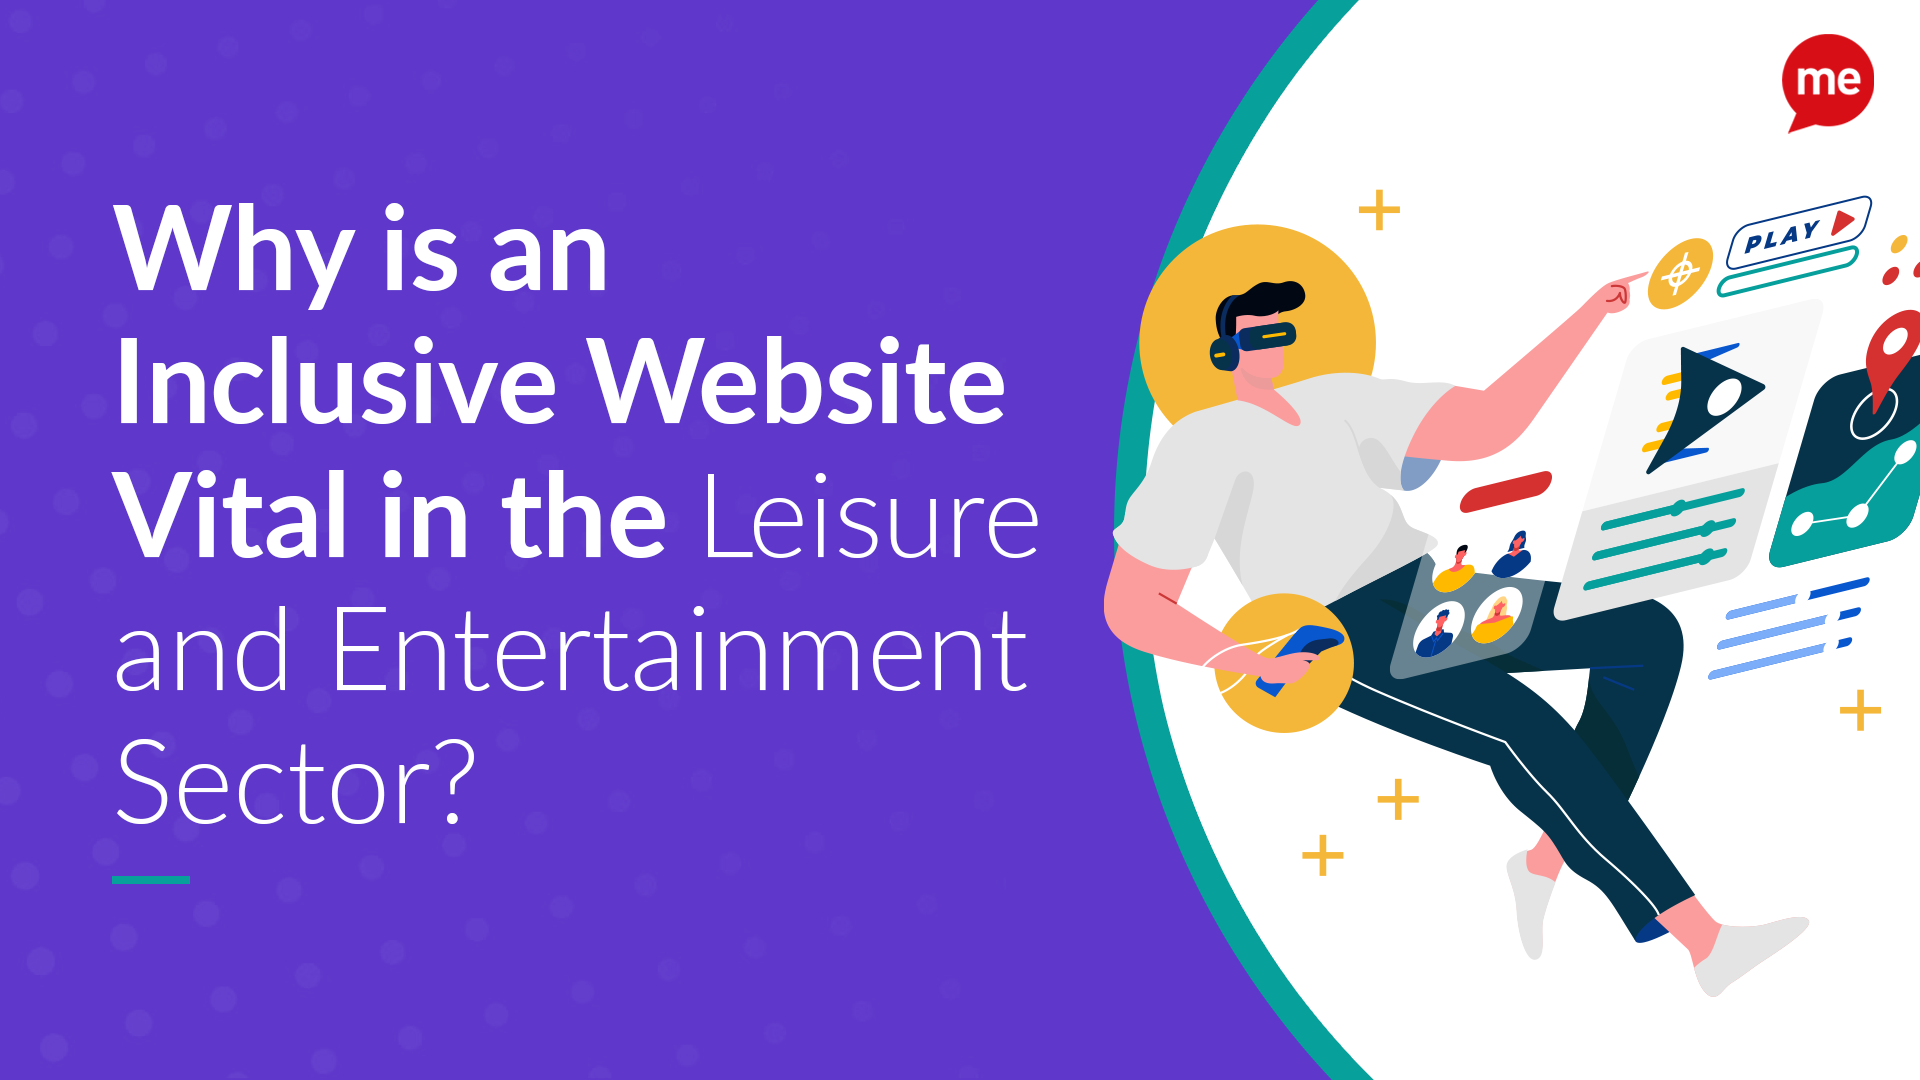 Why is an Inclusive Website Vital in the Leisure and Entertainment Sector?